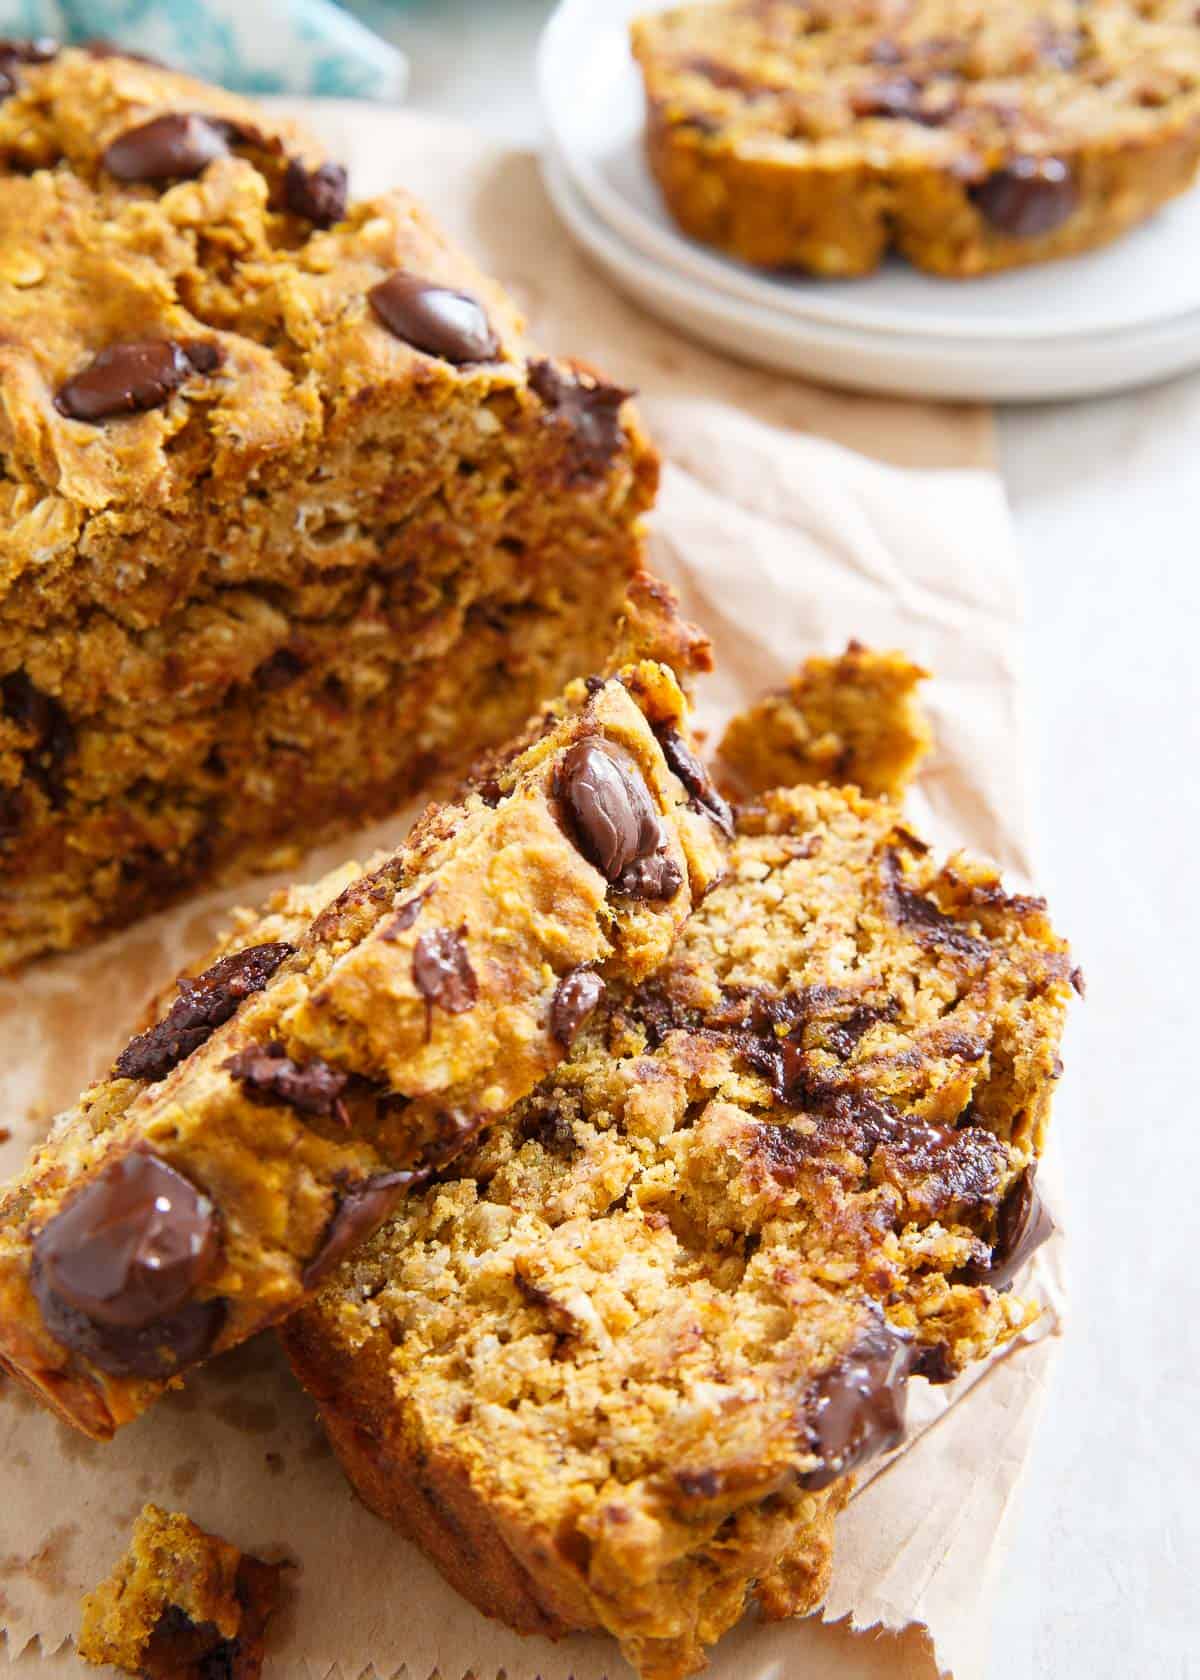 Healthy and hearty Pumpkin Banana Chocolate Chip Bread is a great way to ease into fall baking.